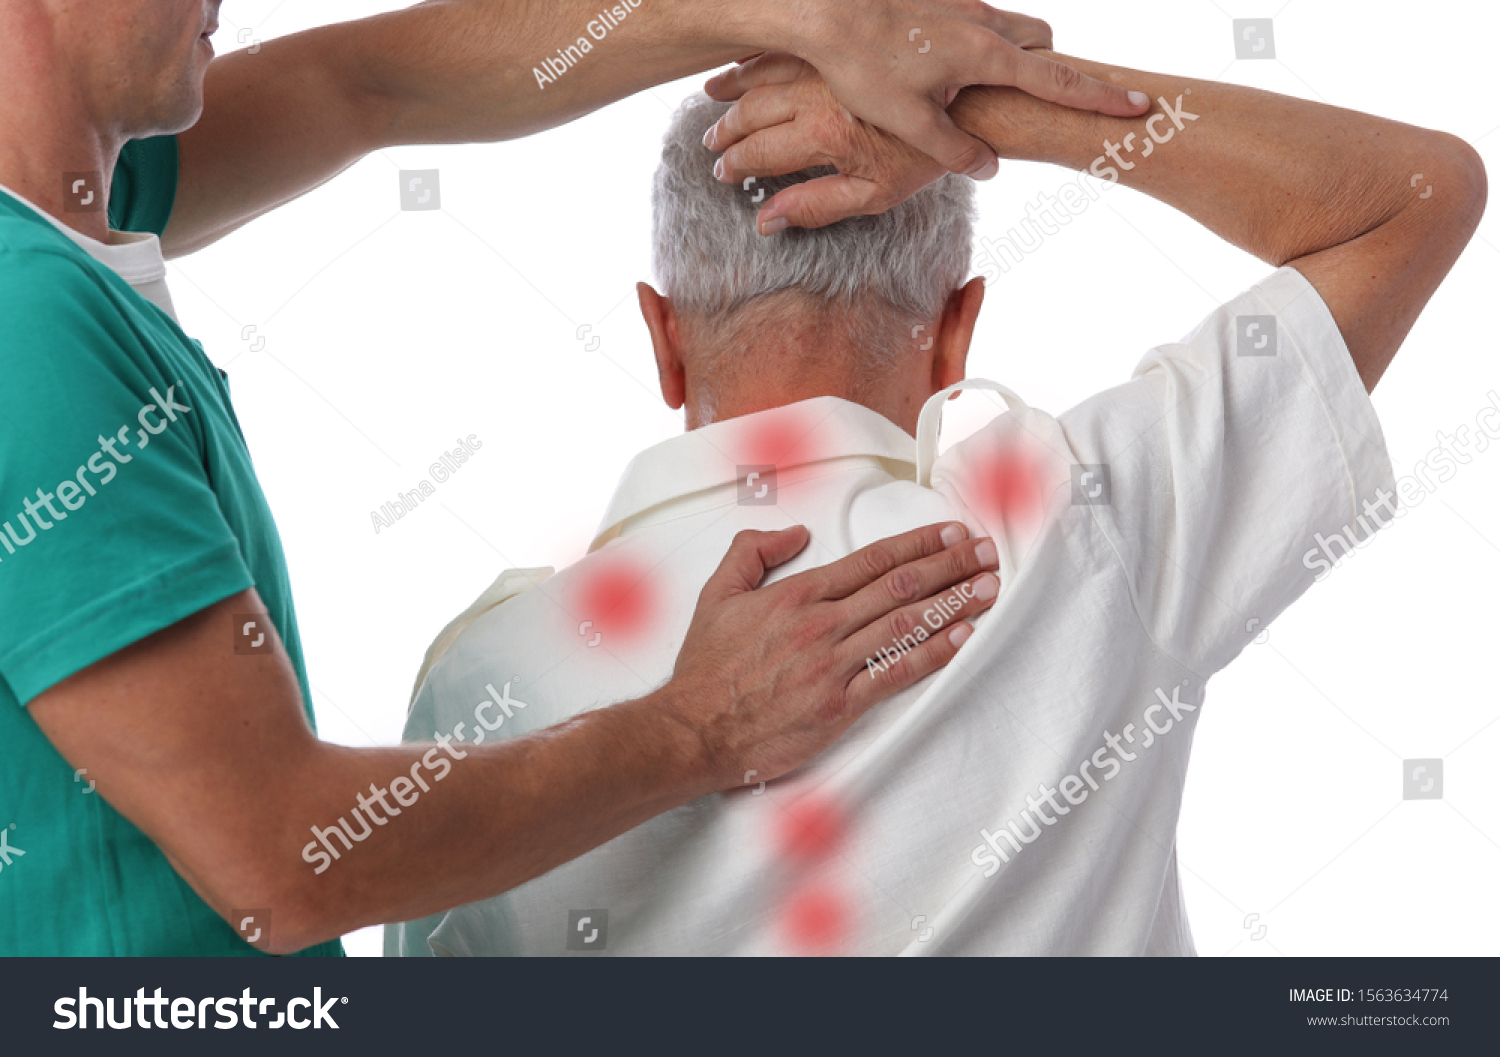 Chiropractic treatment. Shiatsu massage, Back Pain trigger points. Physiotherapy for senior male patient #1563634774